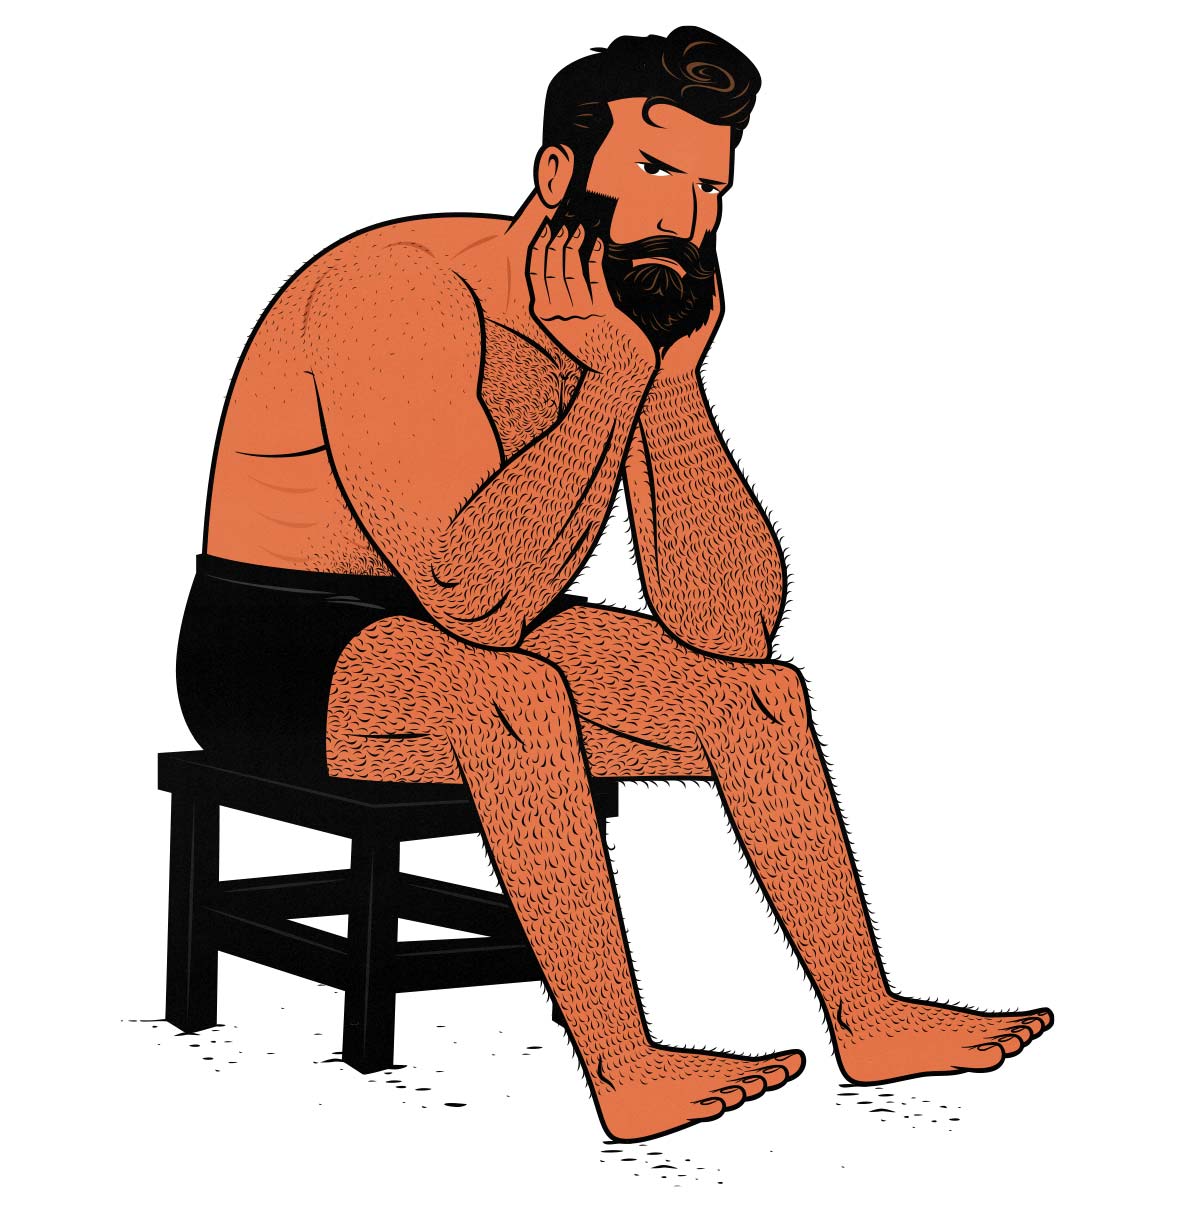 A confused, sad weight lifter, pondering his life. Illustrated by Shane Duquette.